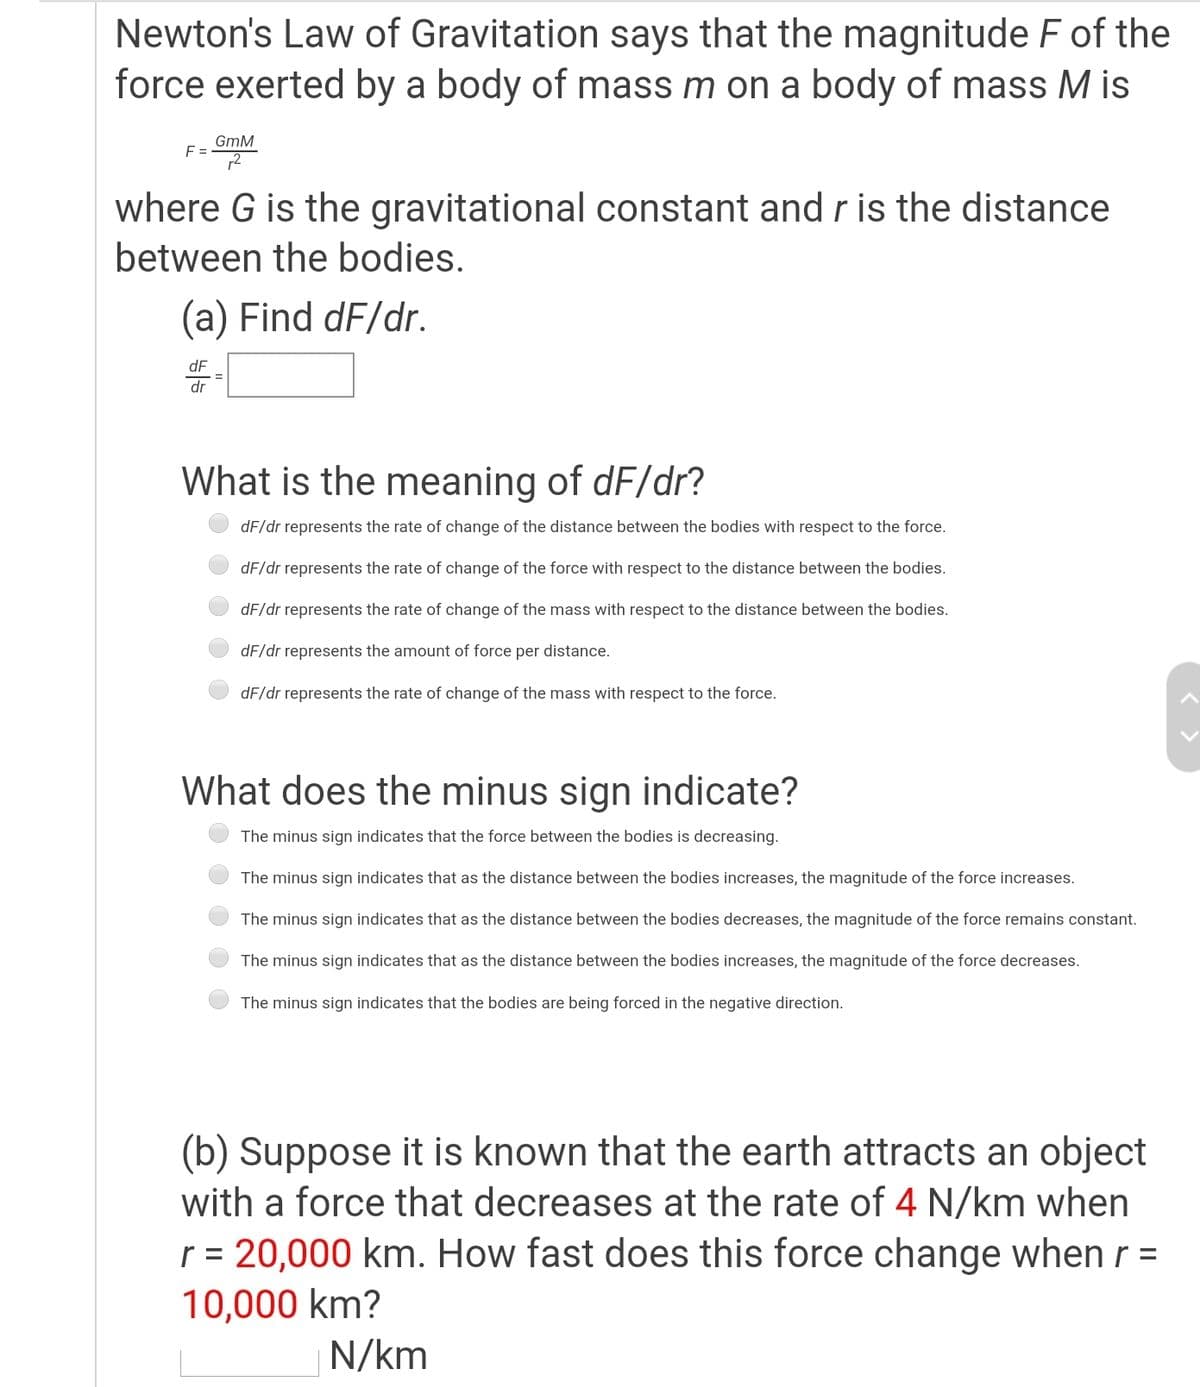 Newton's Law of Gravitation says that the magnitude F of the
force exerted by a body of mass m on a body of mass M is
GmM
F =
where G is the gravitational constant and r is the distance
between the bodies.
(a) Find dF/dr.
dF
dr
What is the meaning of dF/dr?
dF/dr represents the rate of change of the distance between the bodies with respect to the force.
dF/dr represents the rate of change of the force with respect to the distance between the bodies.
dF/dr represents the rate of change of the mass with respect to the distance between the bodies.
dF/dr represents the amount of force per distance.
dF/dr represents the rate of change of the mass with respect to the force.
What does the minus sign indicate?
The minus sign indicates that the force between the bodies is decreasing.
The minus sign indicates that as the distance between the bodies increases, the magnitude of the force increases.
The minus sign indicates that as the distance between the bodies decreases, the magnitude of the force remains constant.
The minus sign indicates that as the distance between the bodies increases, the magnitude of the force decreases.
The minus sign indicates that the bodies are being forced in the negative direction.
(b) Suppose it is known that the earth attracts an object
with a force that decreases at the rate of 4 N/km when
r = 20,000 km. How fast does this force change when r =
%3D
10,000 km?
N/km
